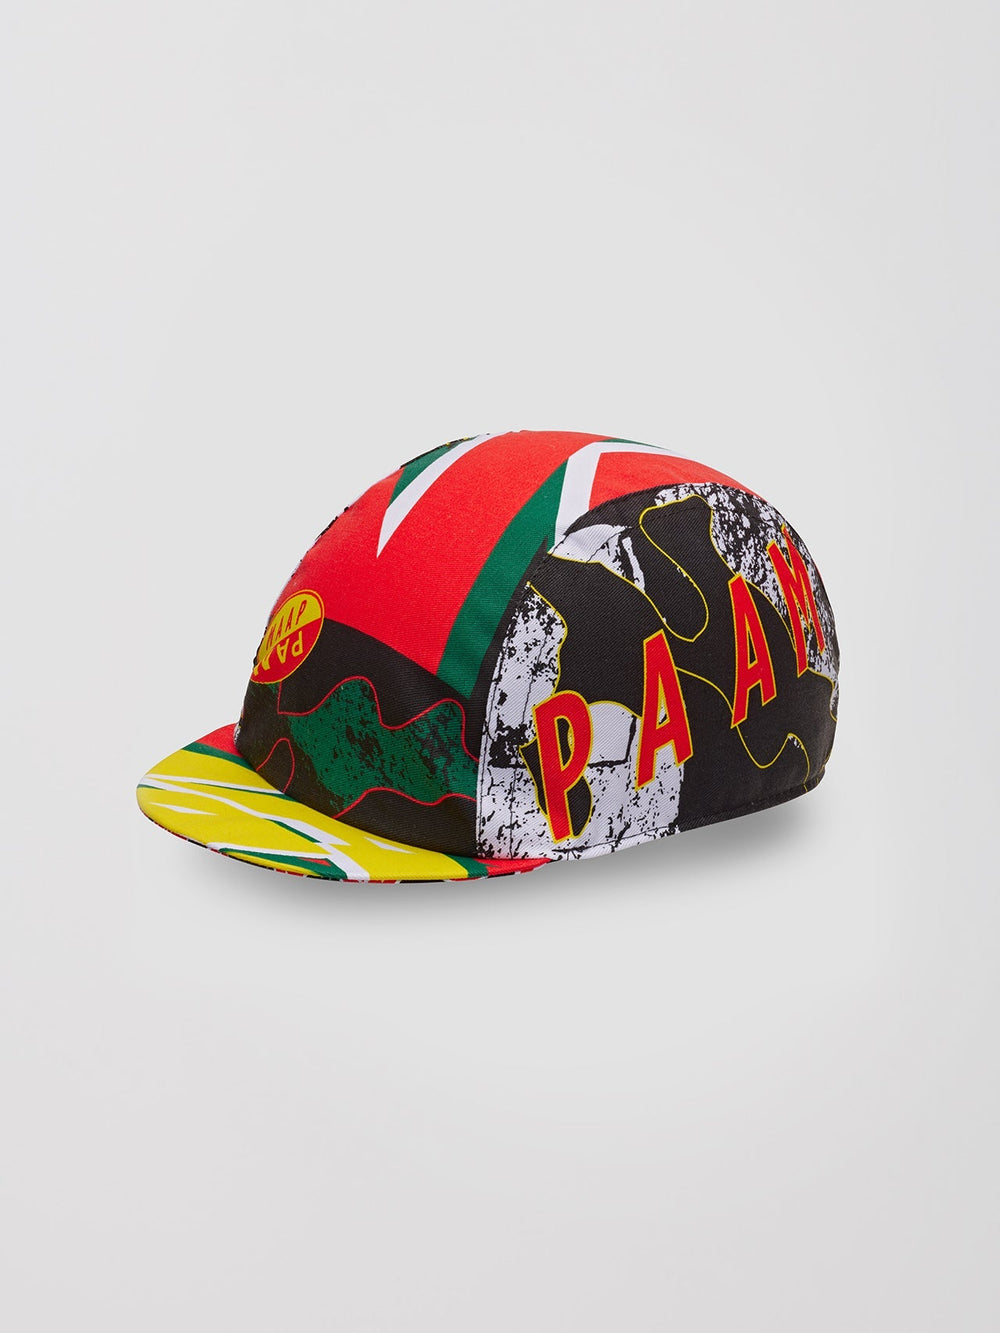 Product Image for MAAP x PAM Cycling Cap